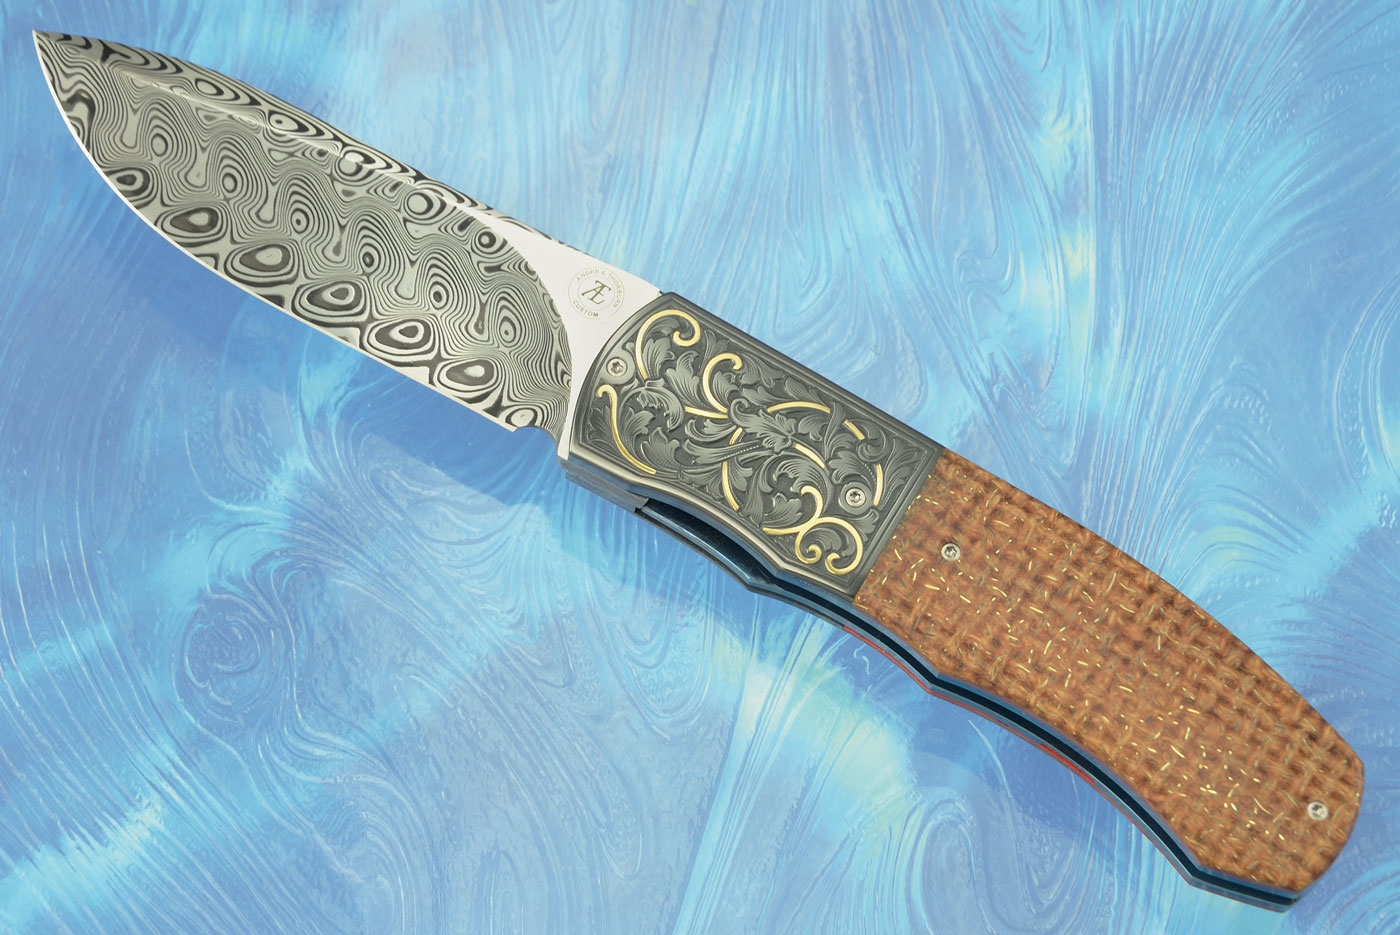 L46 Front Flipper with Thunderstorm Kevlar and Engraved Zirconium with Gold Inlay (Ceramic IKBS)